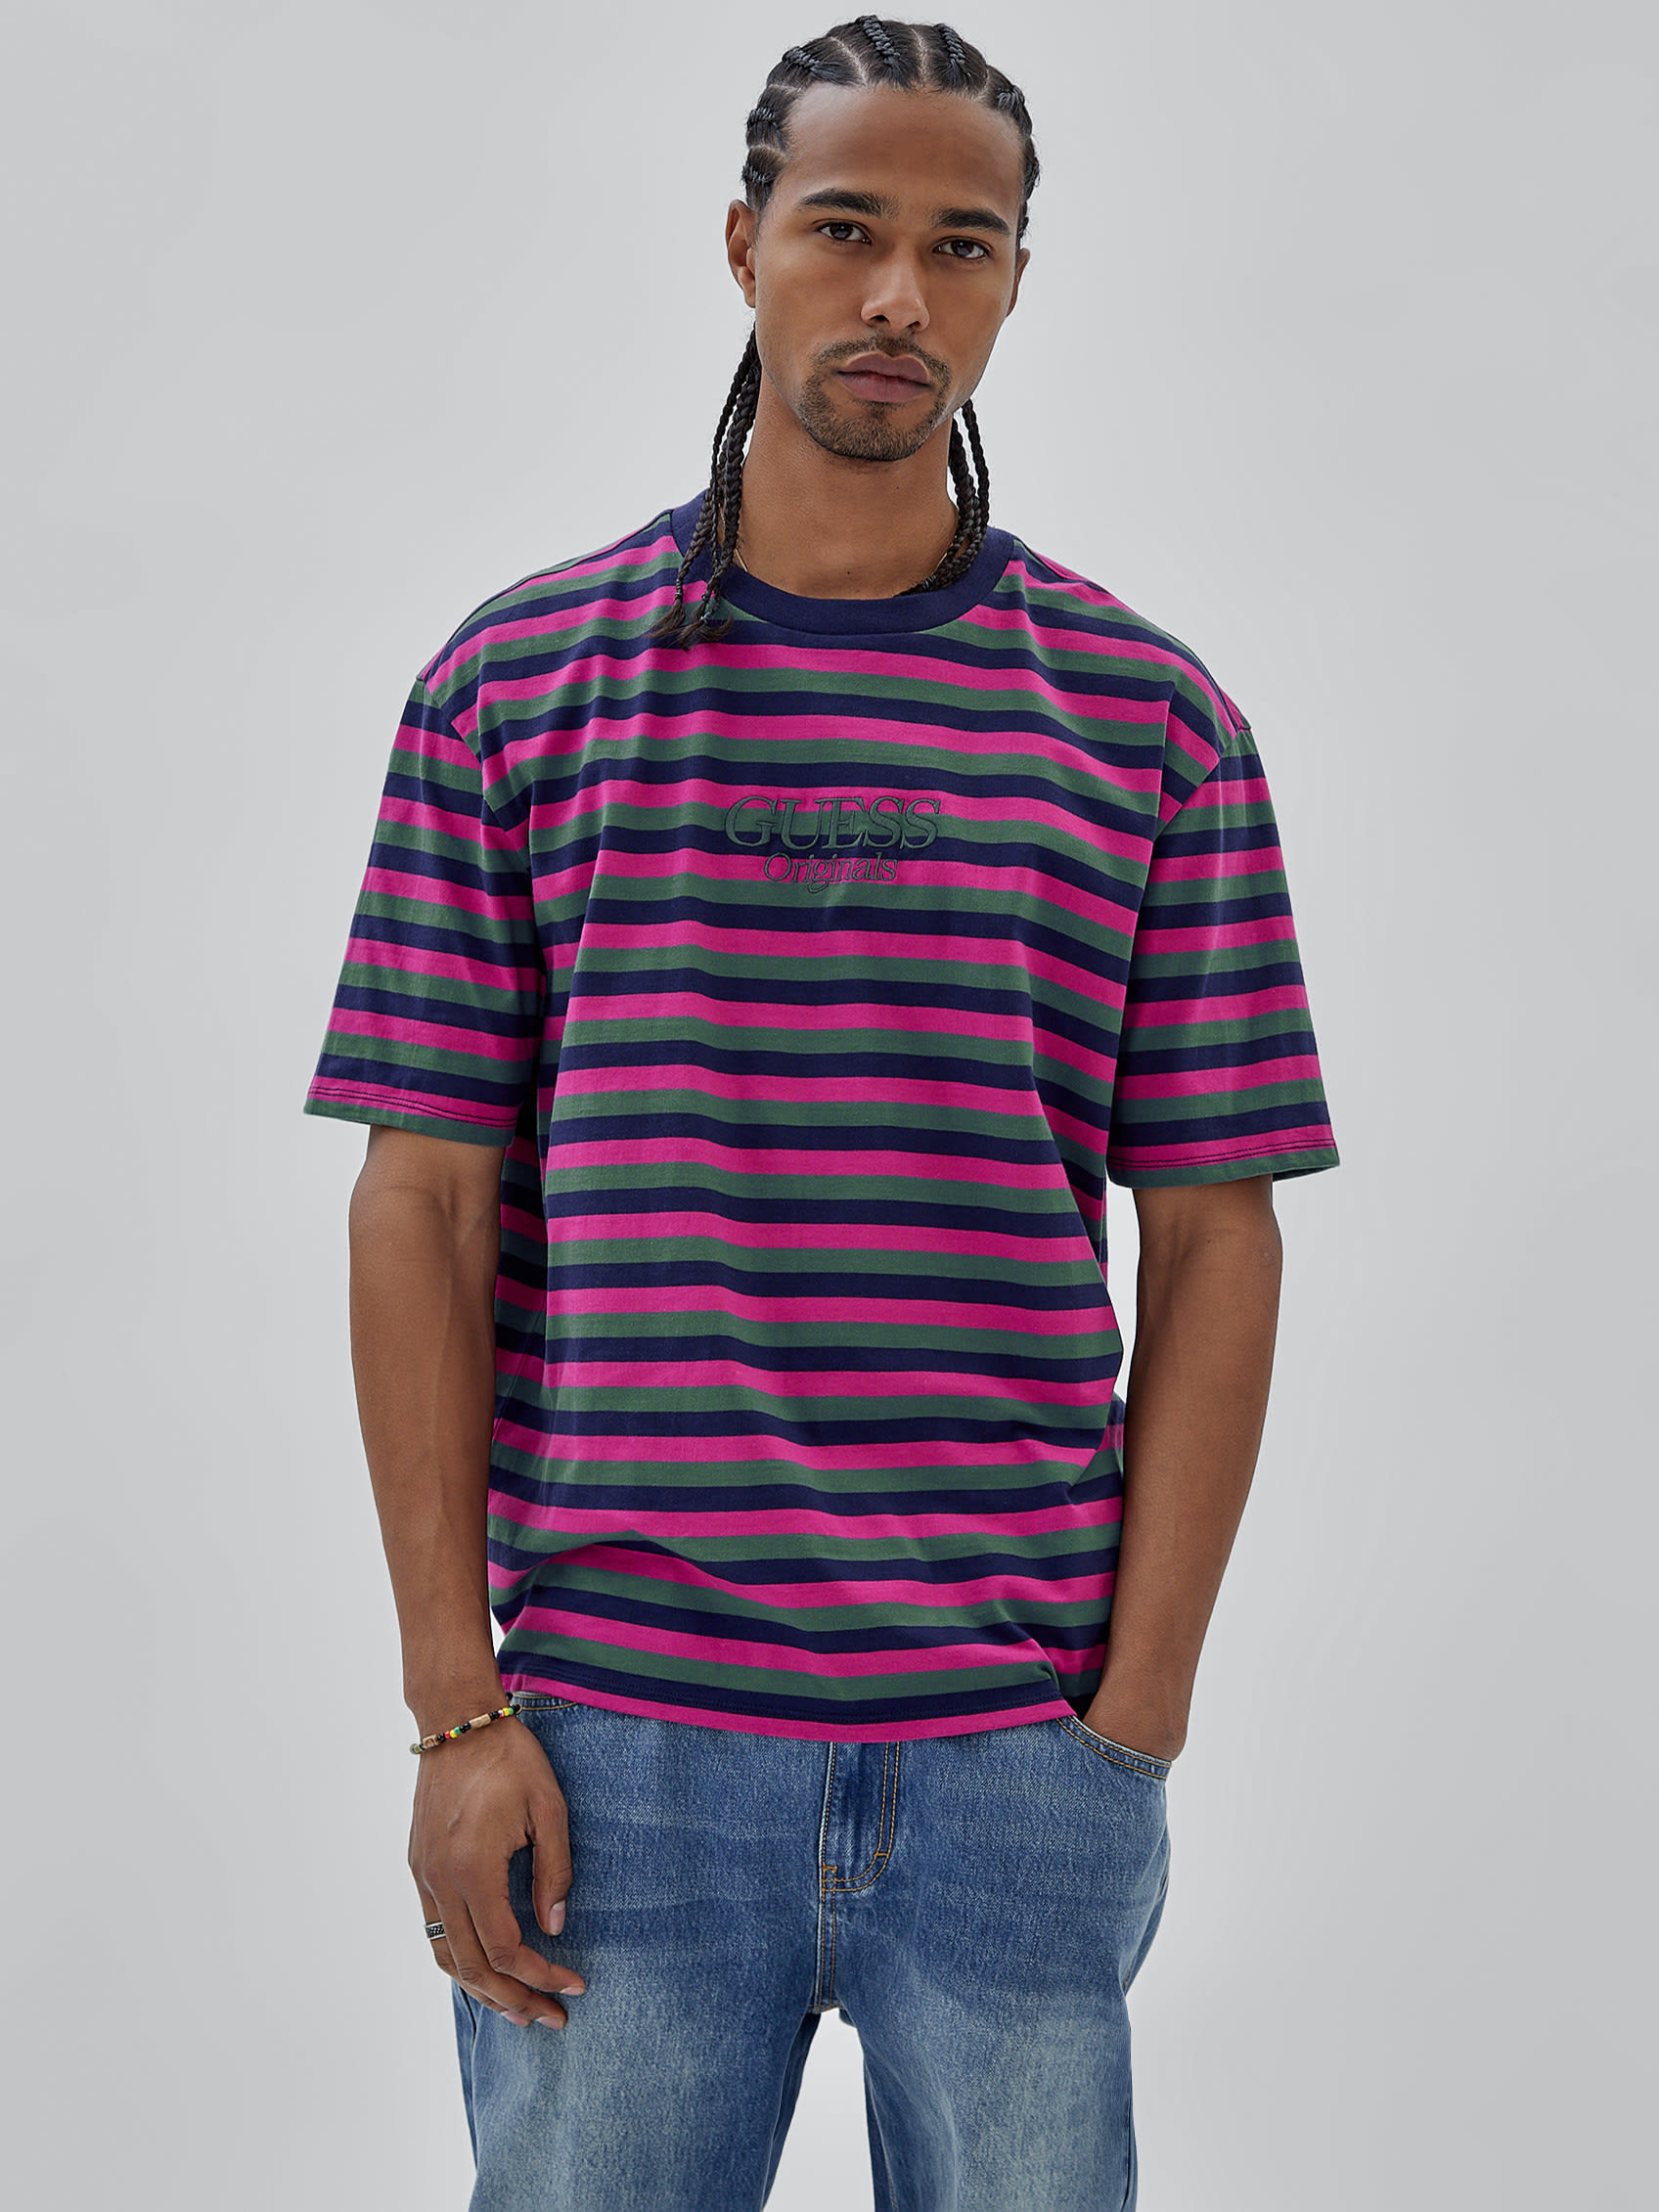 GUESS Originals ECO HORIZONTAL STRIPED TEE | Guess Philippines